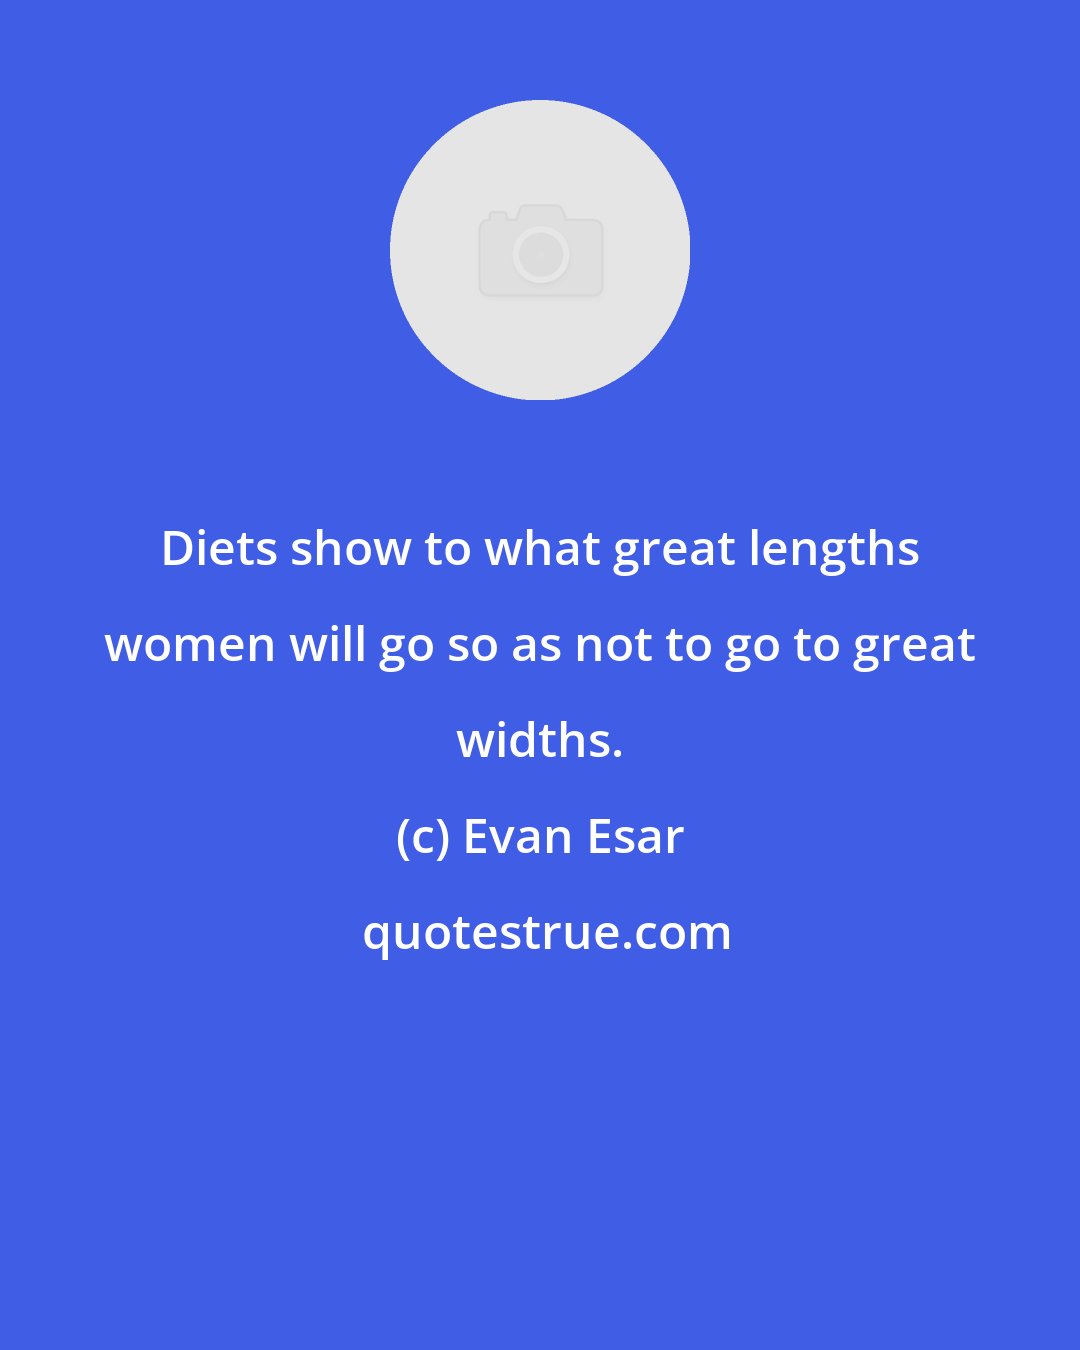 Evan Esar: Diets show to what great lengths women will go so as not to go to great widths.